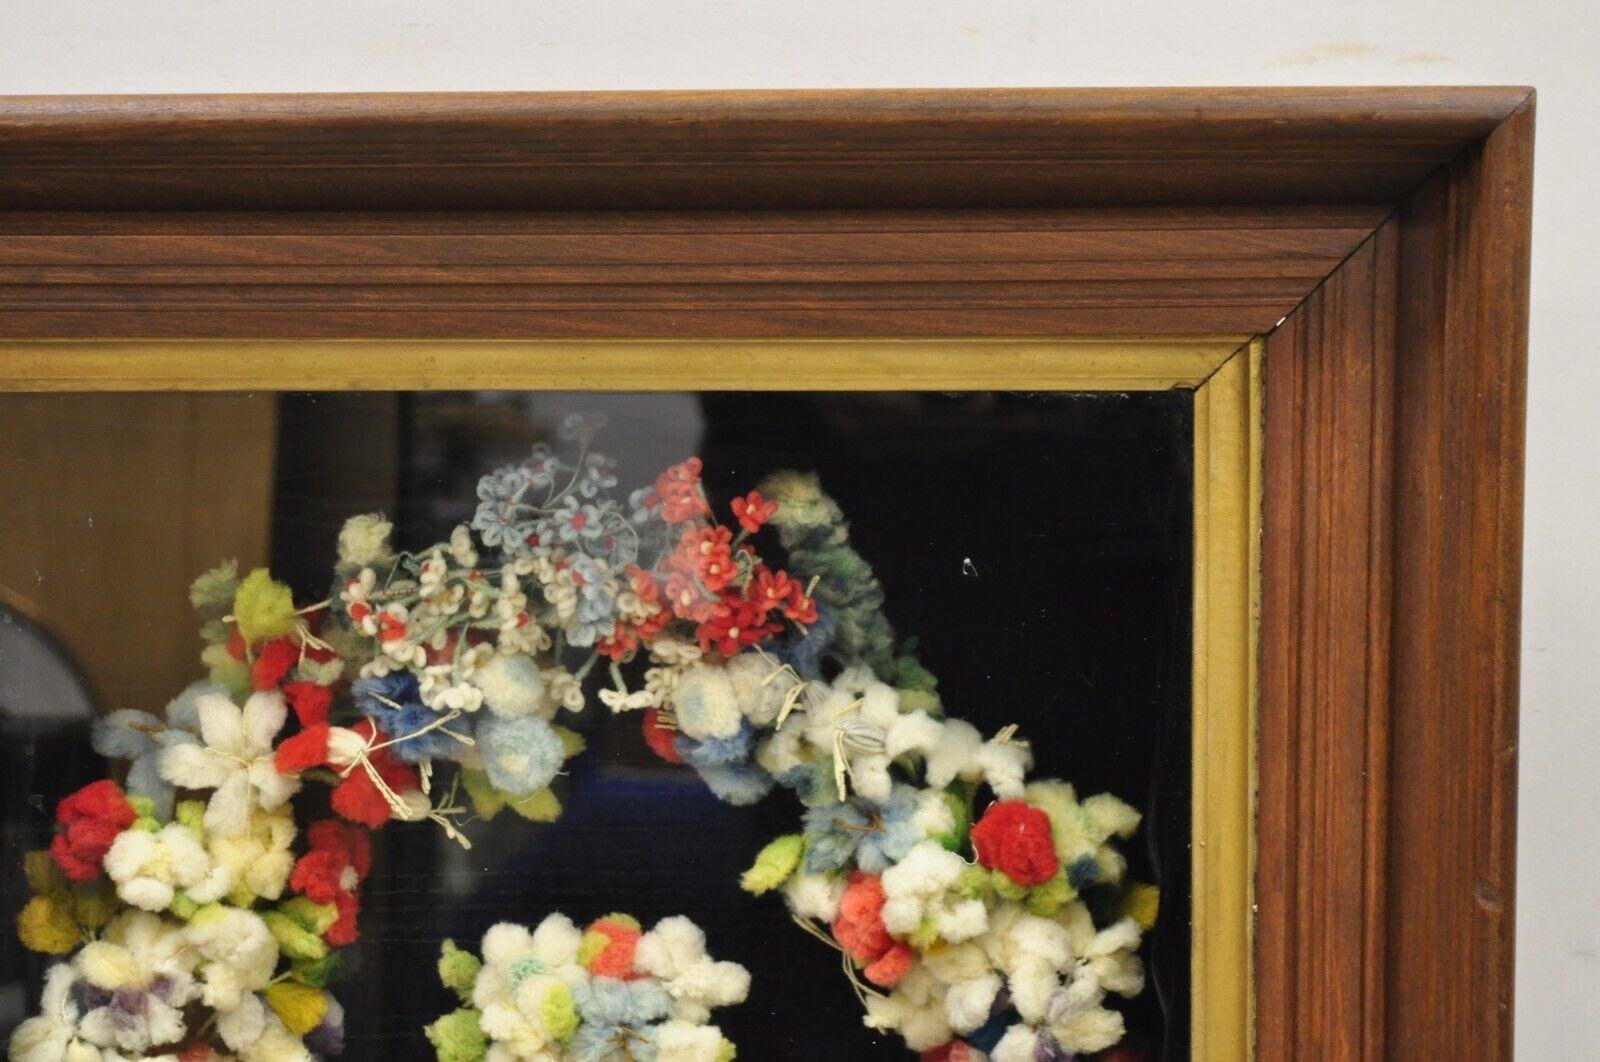 Vintage Mahogany Deep Shadow Box Frame Felt Cotton Mourning Wreath Wall Art In Good Condition For Sale In Philadelphia, PA